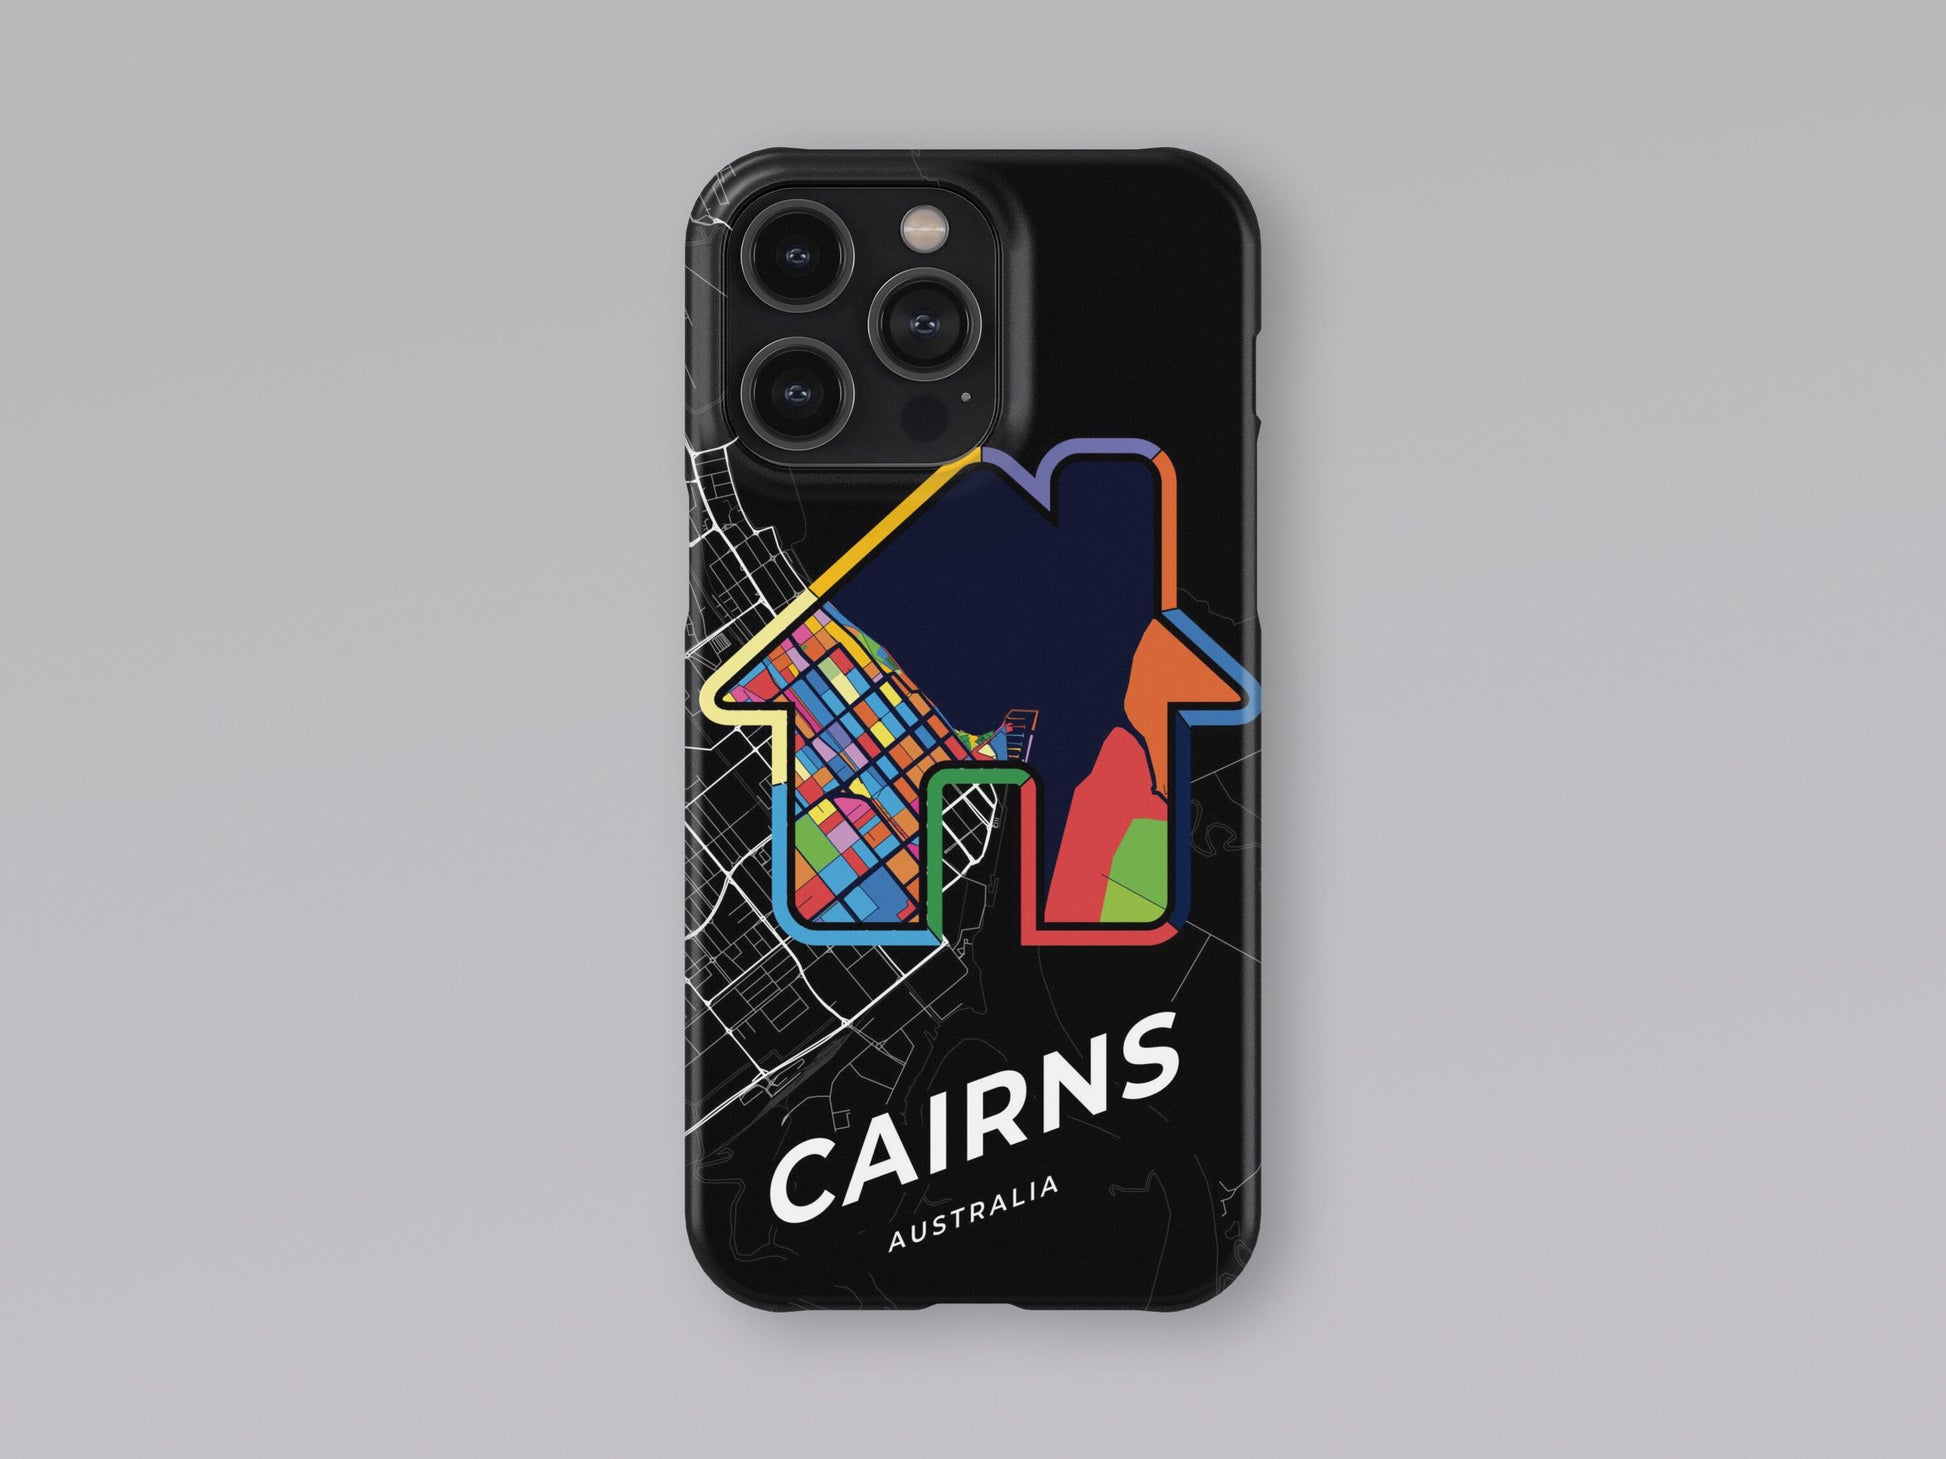 Cairns Australia slim phone case with colorful icon. Birthday, wedding or housewarming gift. Couple match cases. 3